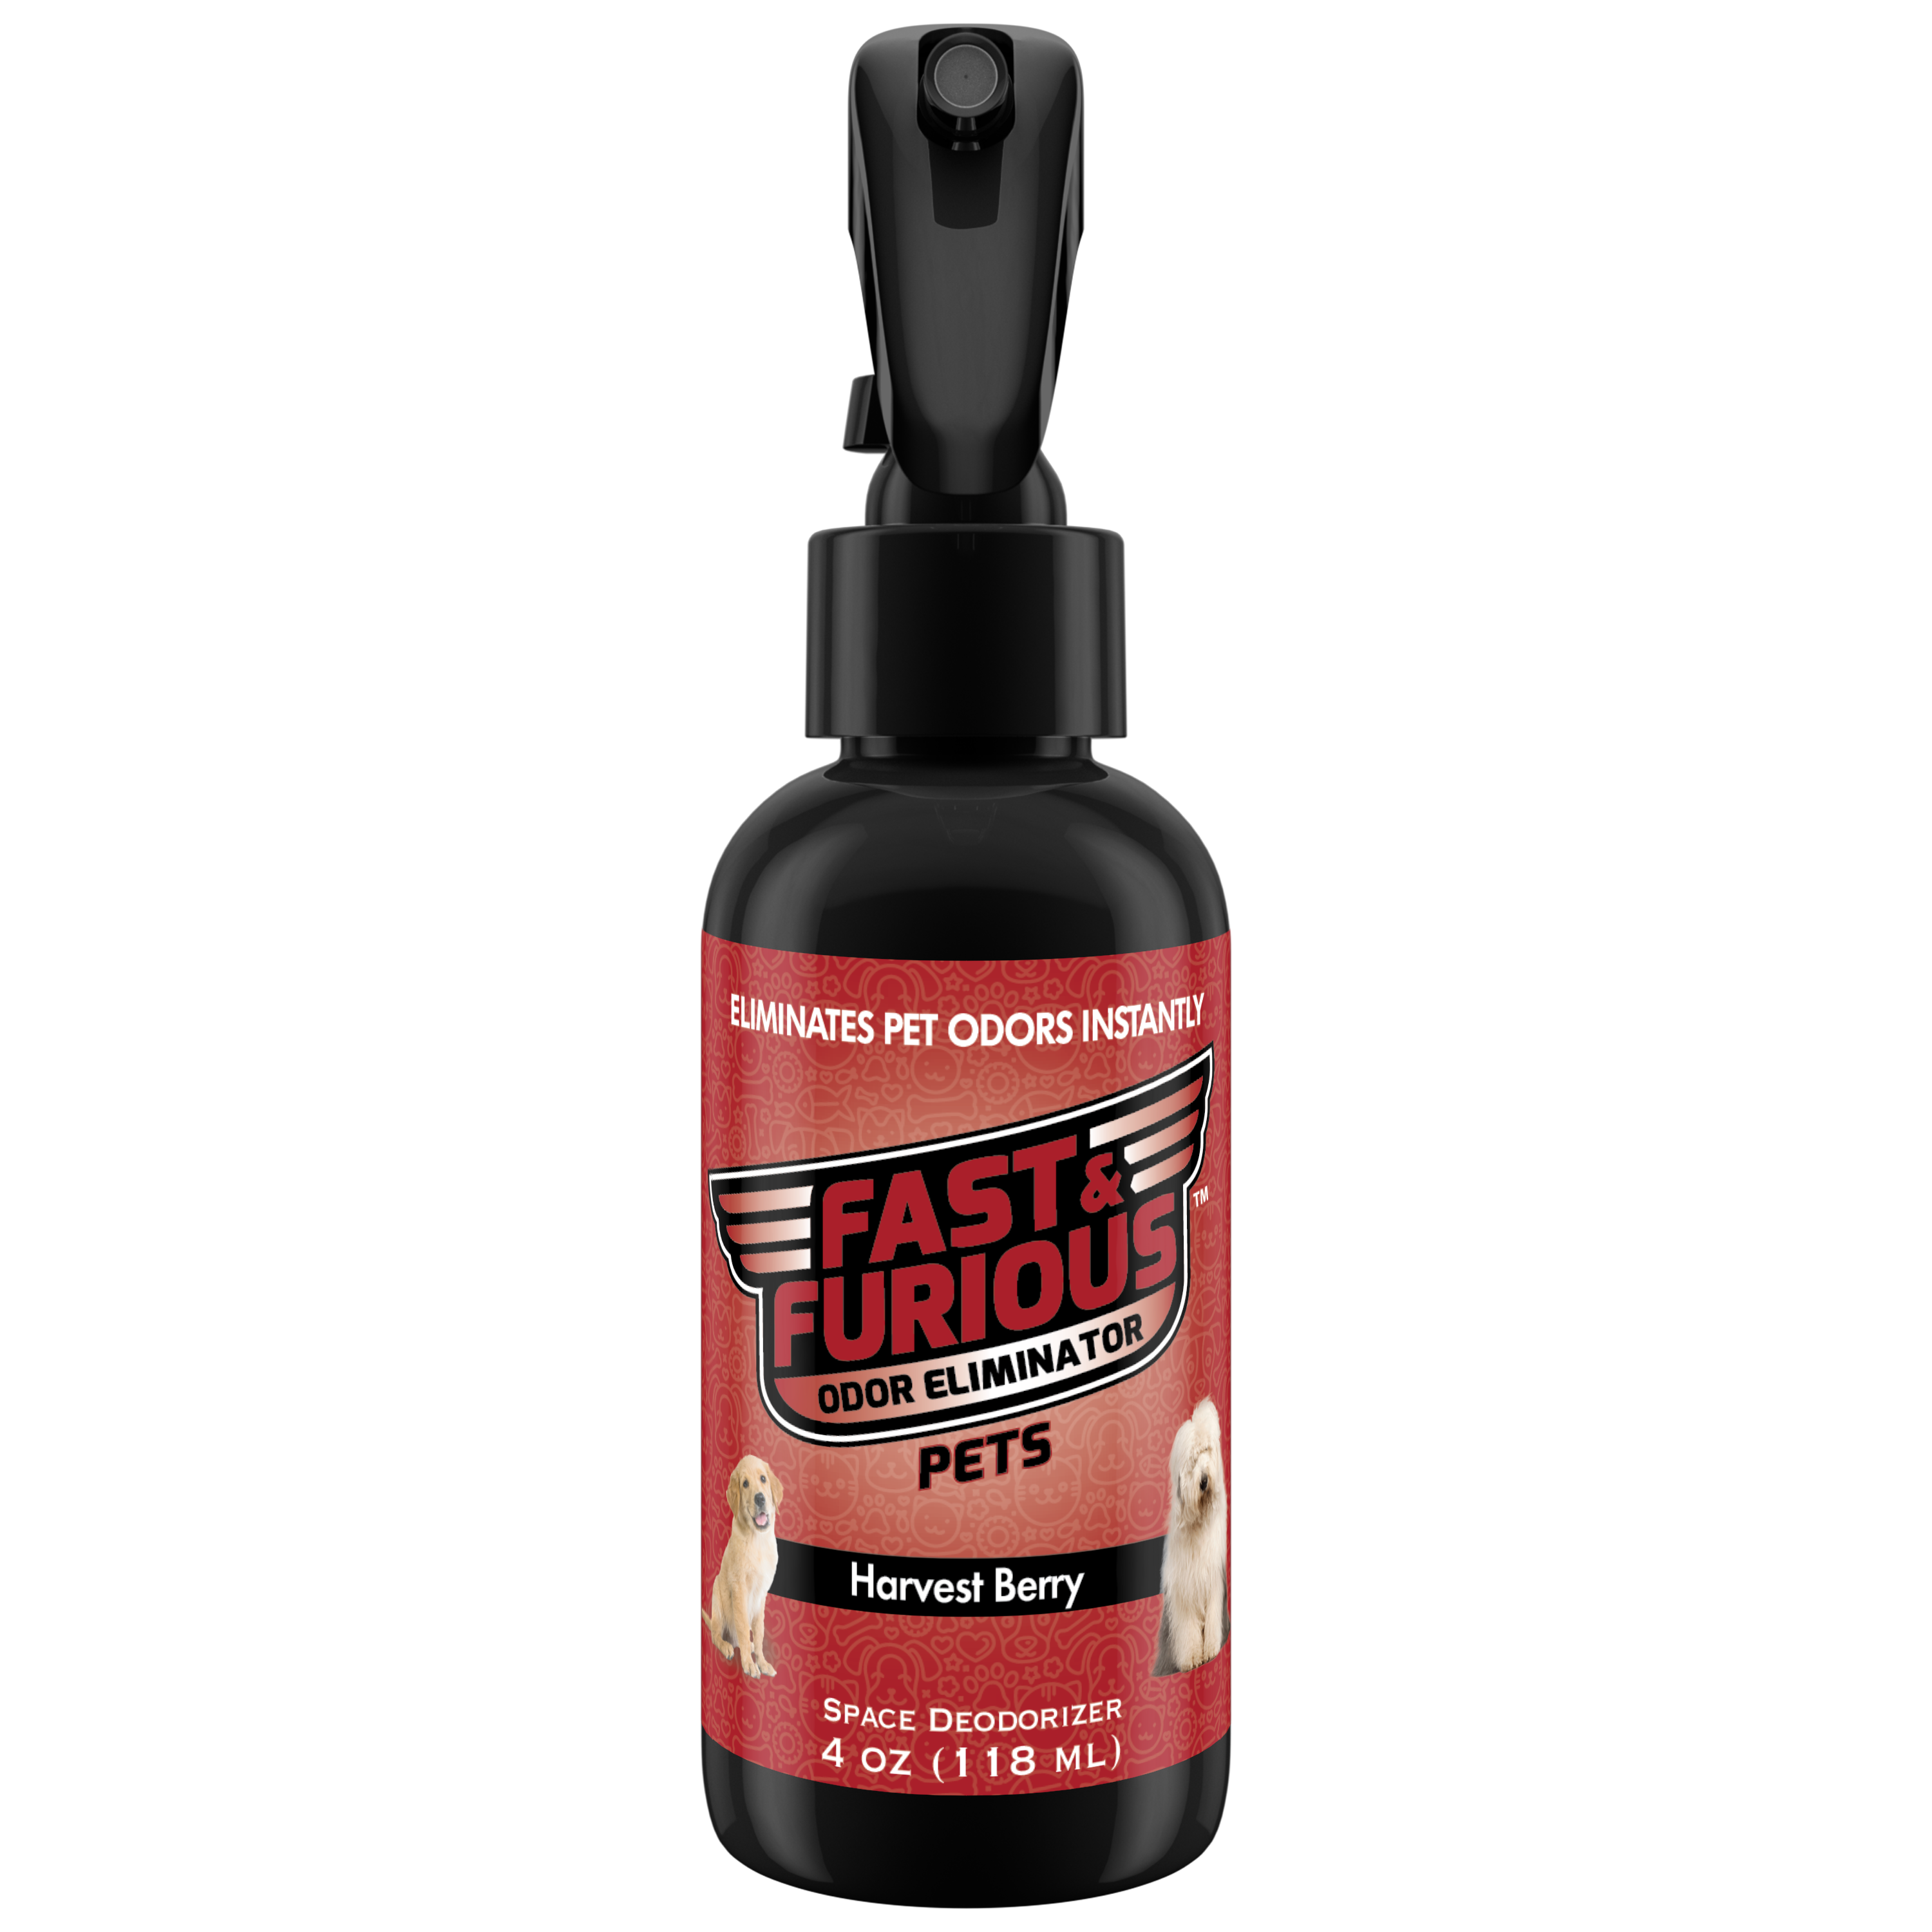 Fast and Furious Pets Odor Eliminator - Harvest Berry Scent